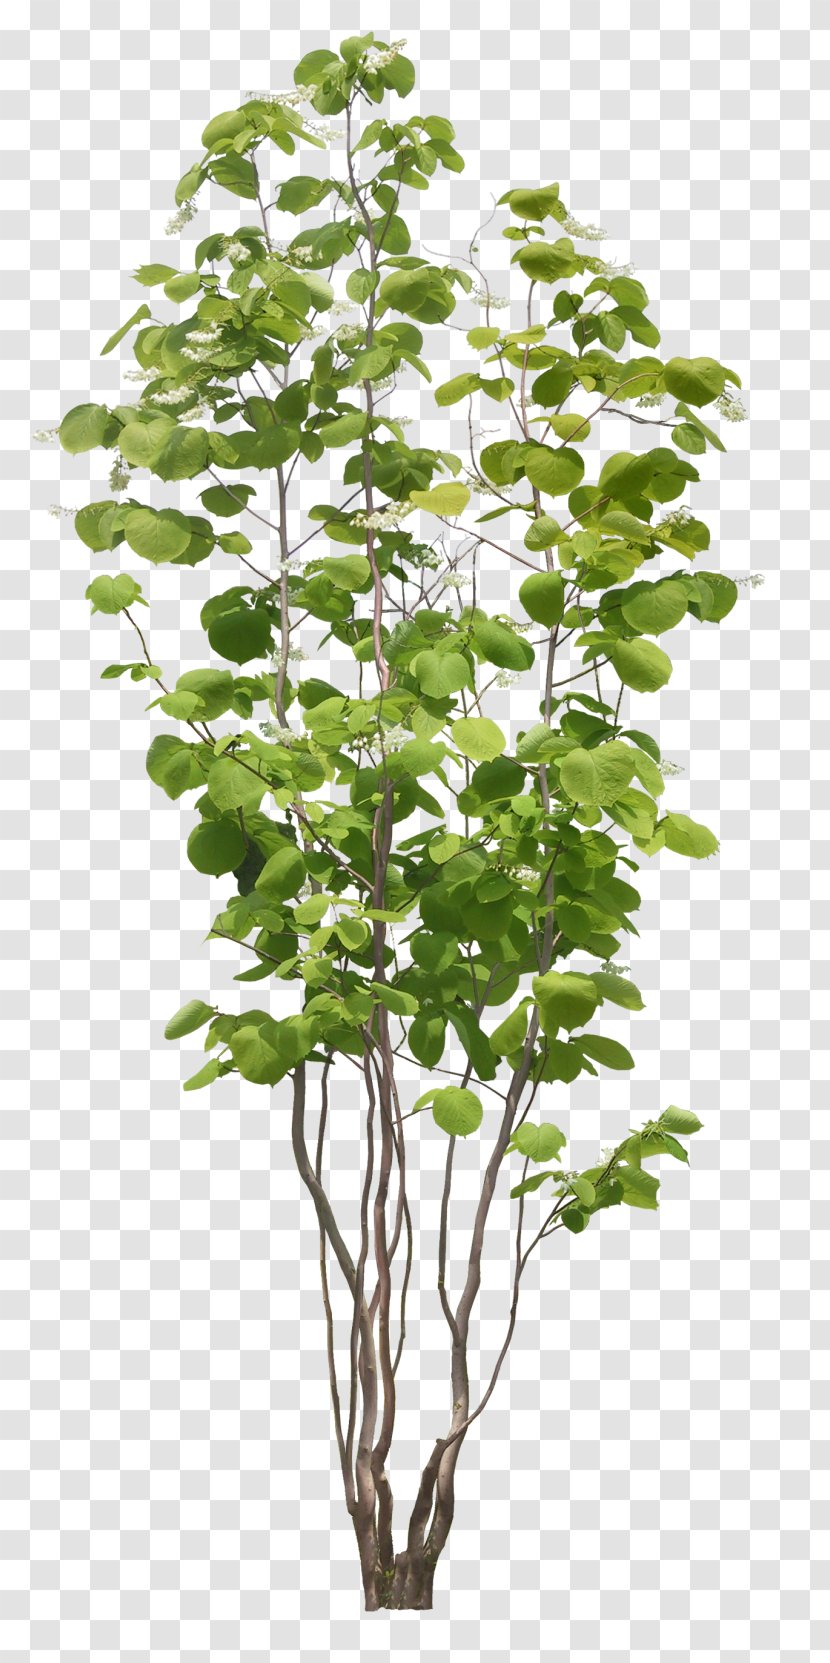 Adobe Photoshop Architectural Rendering Image - Herb - Tree Transparent PNG